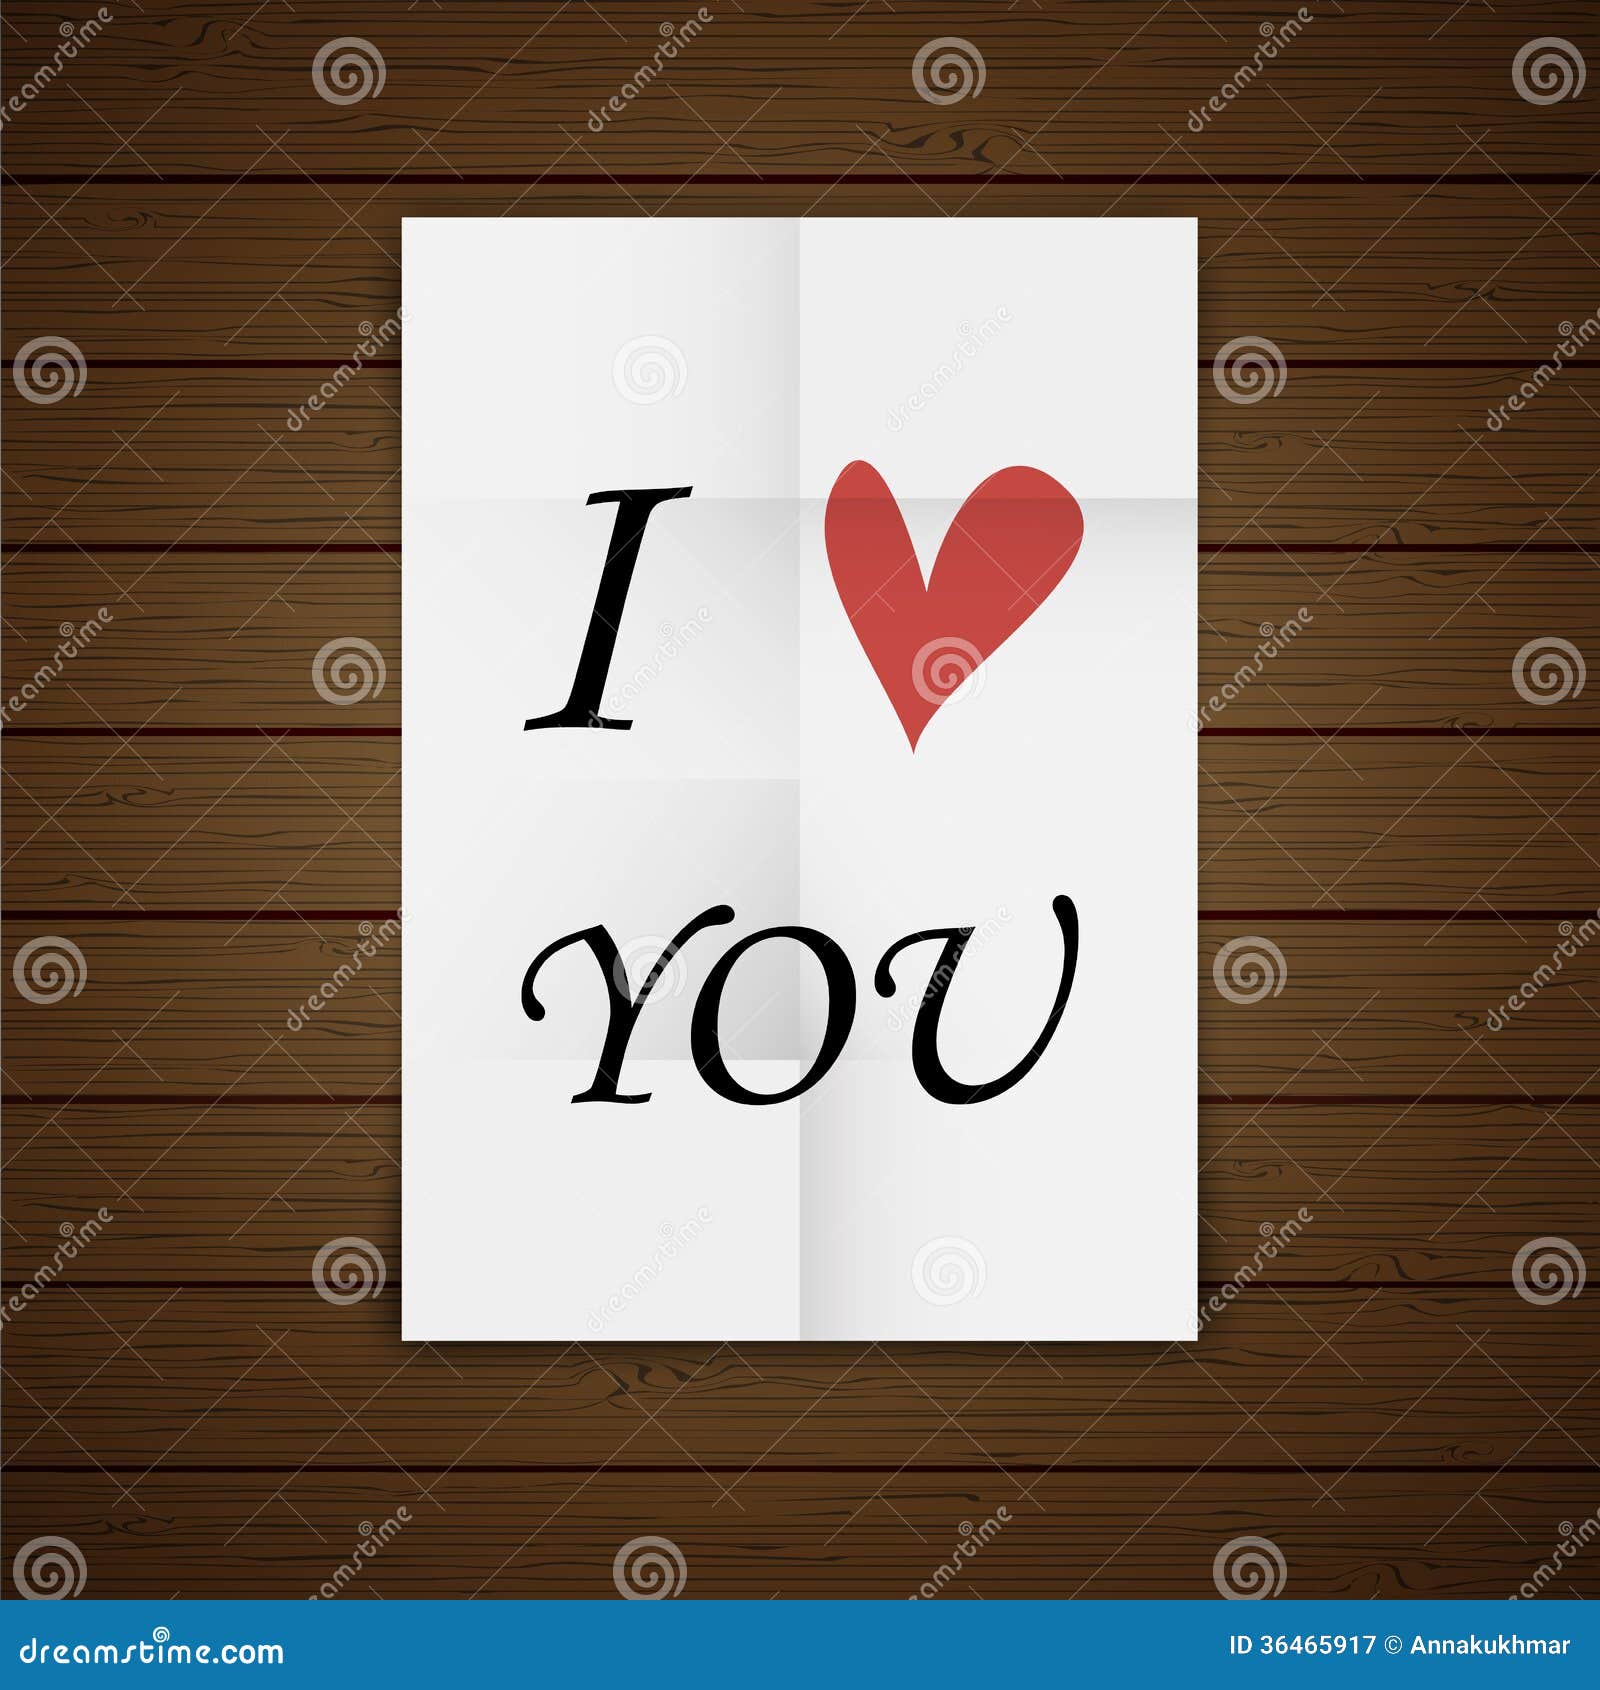 Love quote poster. Effects poster, frame, colors background and colors ...